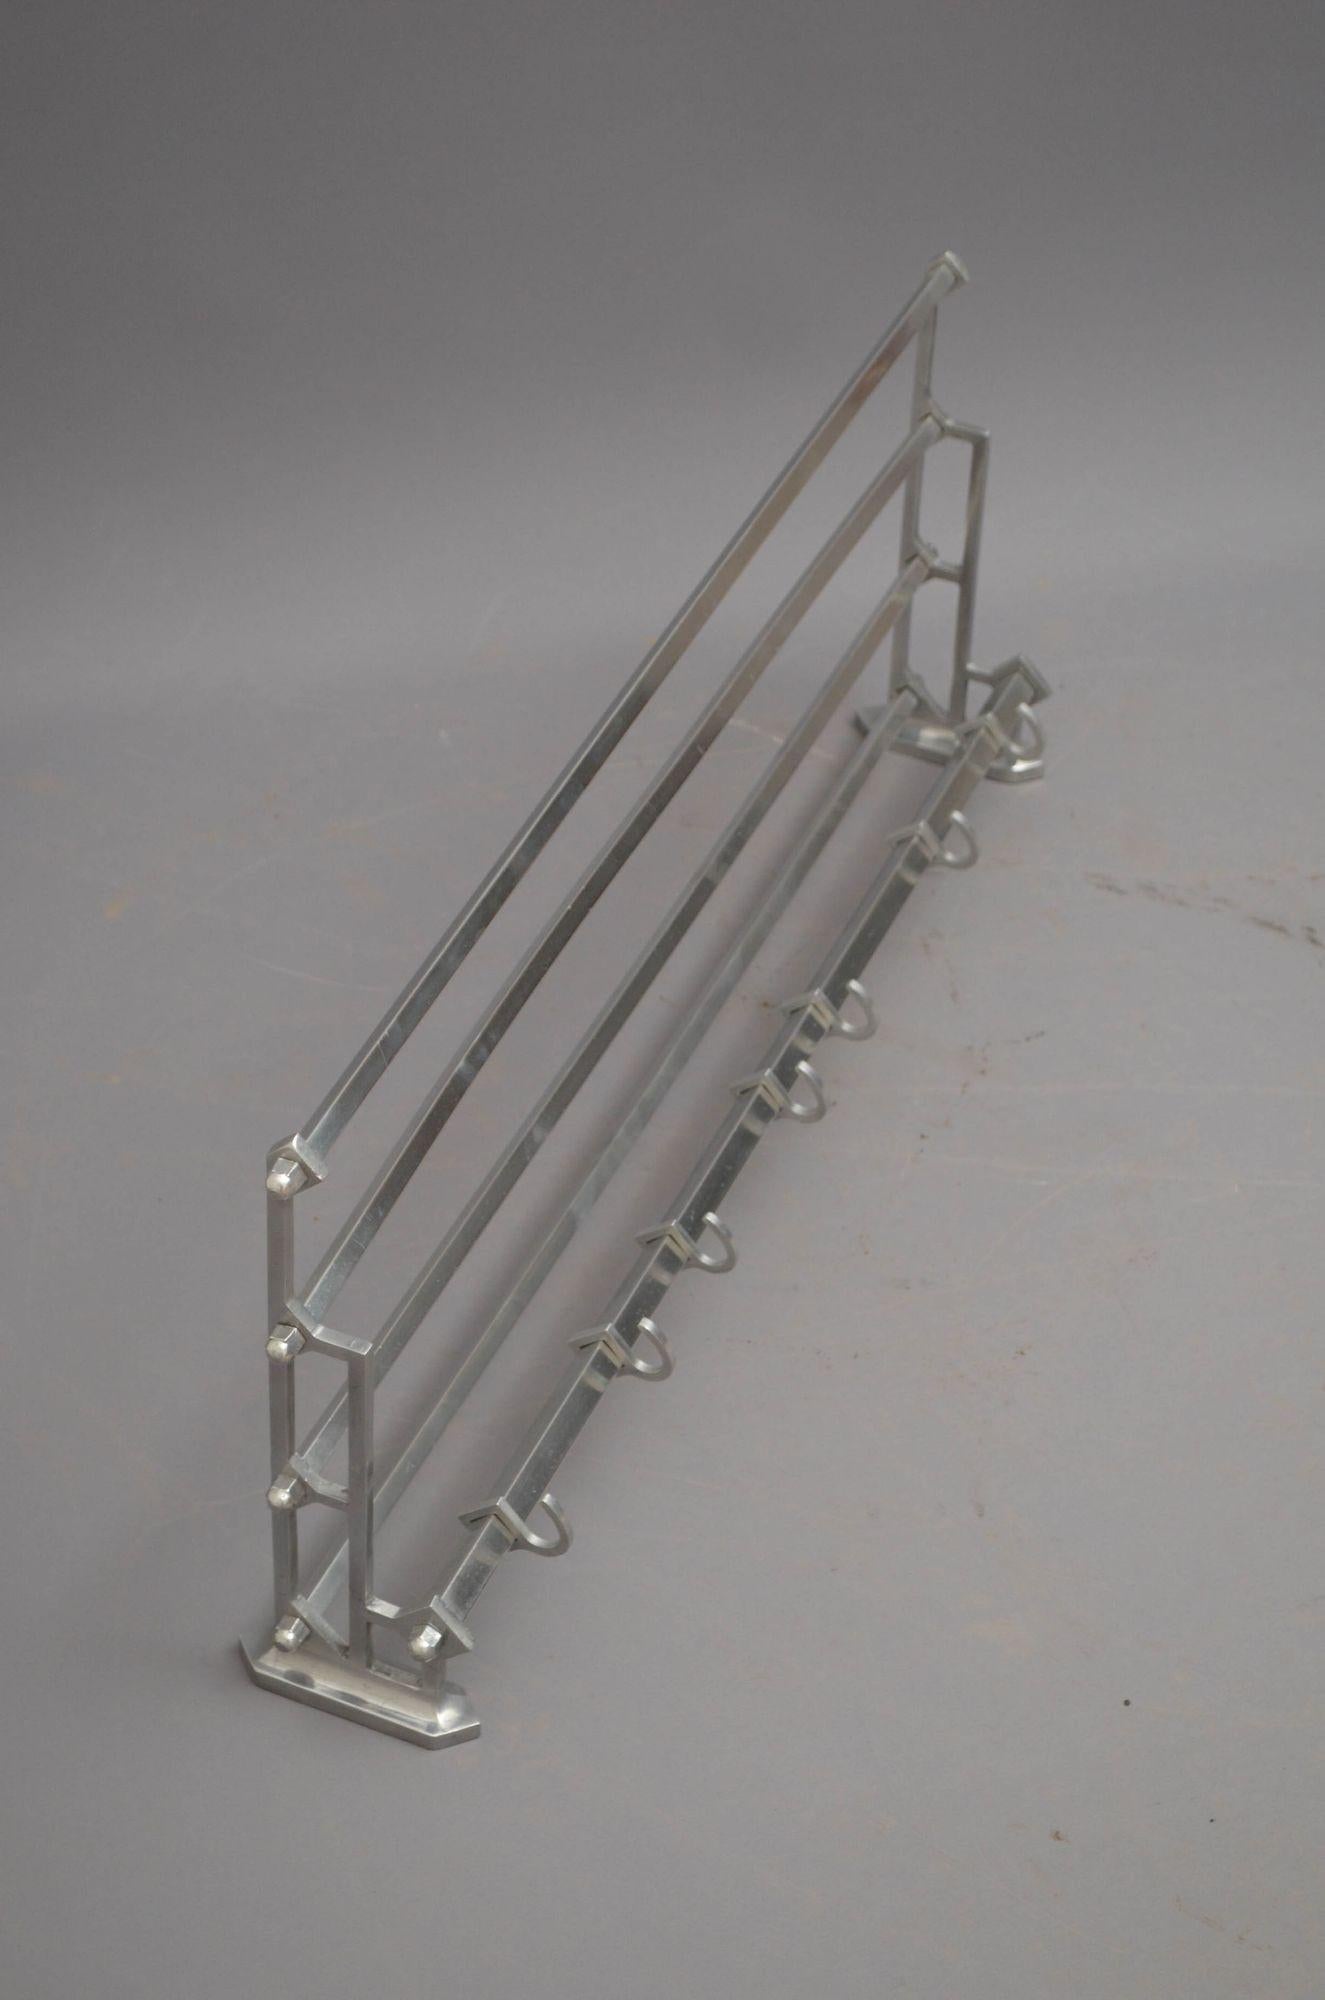 P0275 Stylish Bauhaus design, train style coat rack with a shelf, having seven adjustable hooks, four top shelf bars (with iron insets, making it very strong) and elegant stylized sides. This antique coat hook rack was cleaned and polished and is in